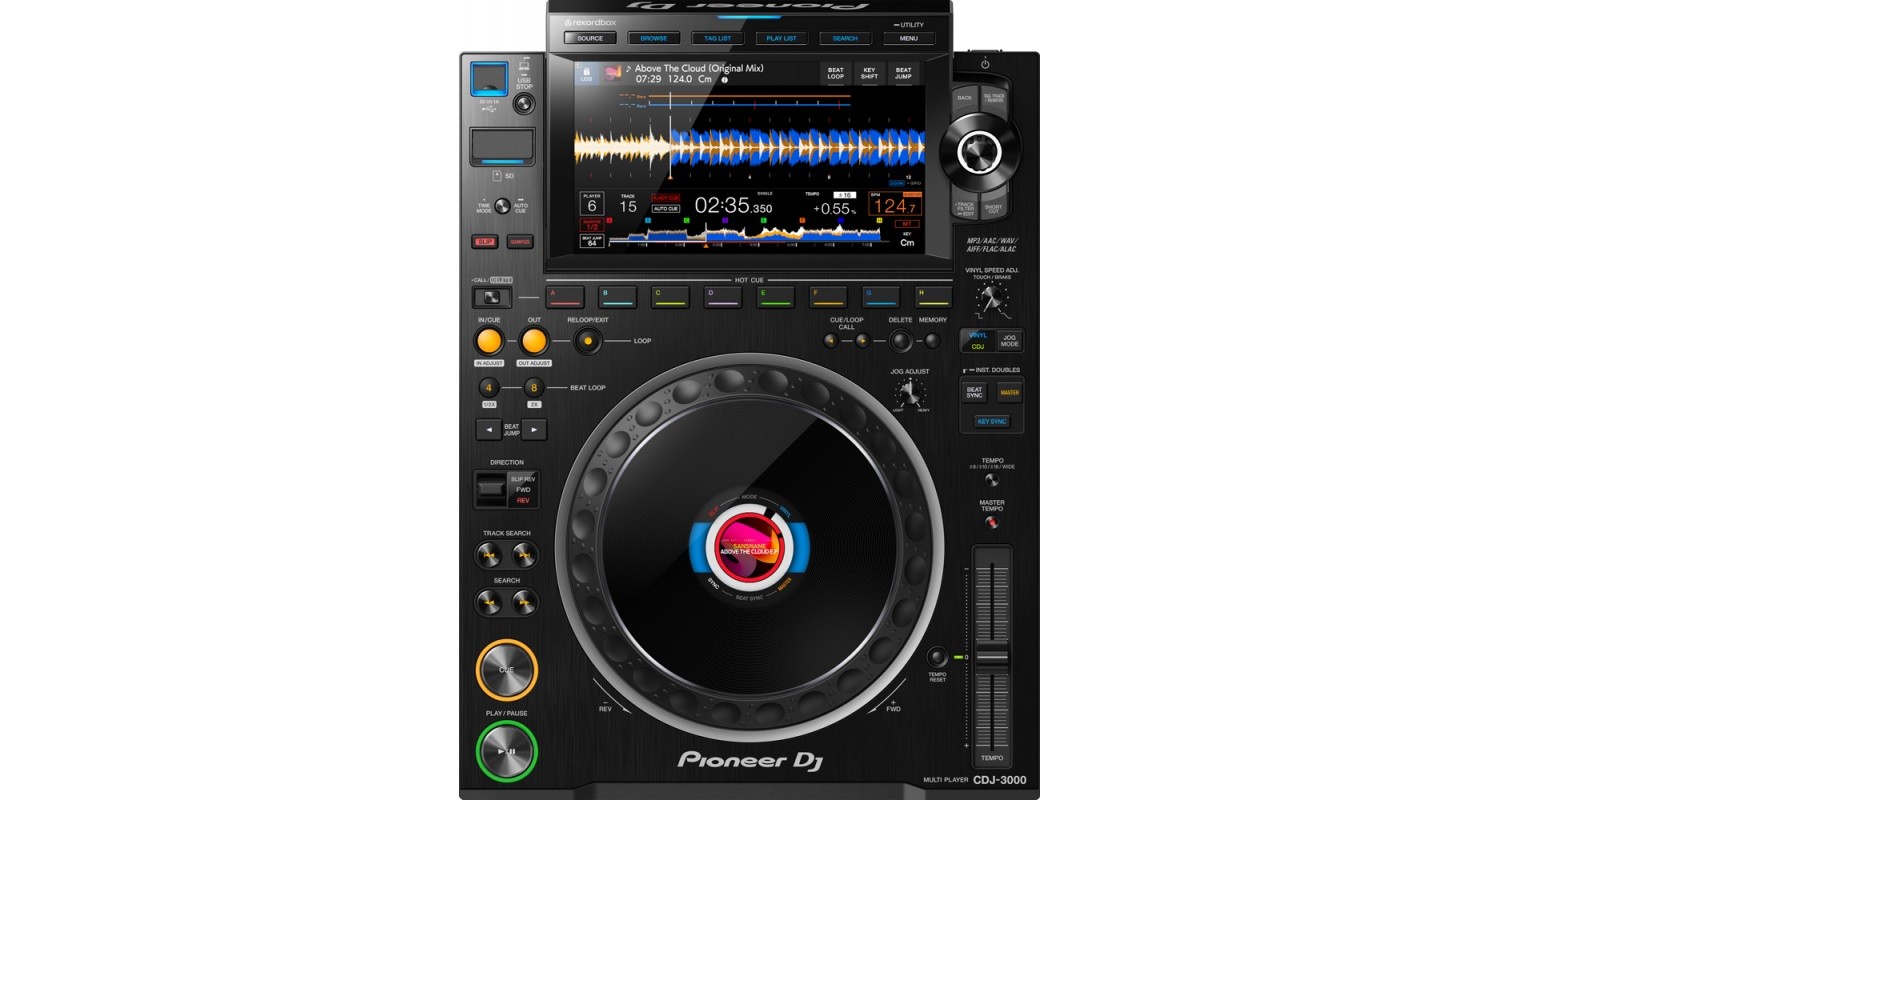 https://www.musicalbarquillo.com/index.php?id_product=8577&id_product_attribute=0&rewrite=cdj3000-reproductor-profesional-pioneer-dj&controller=product